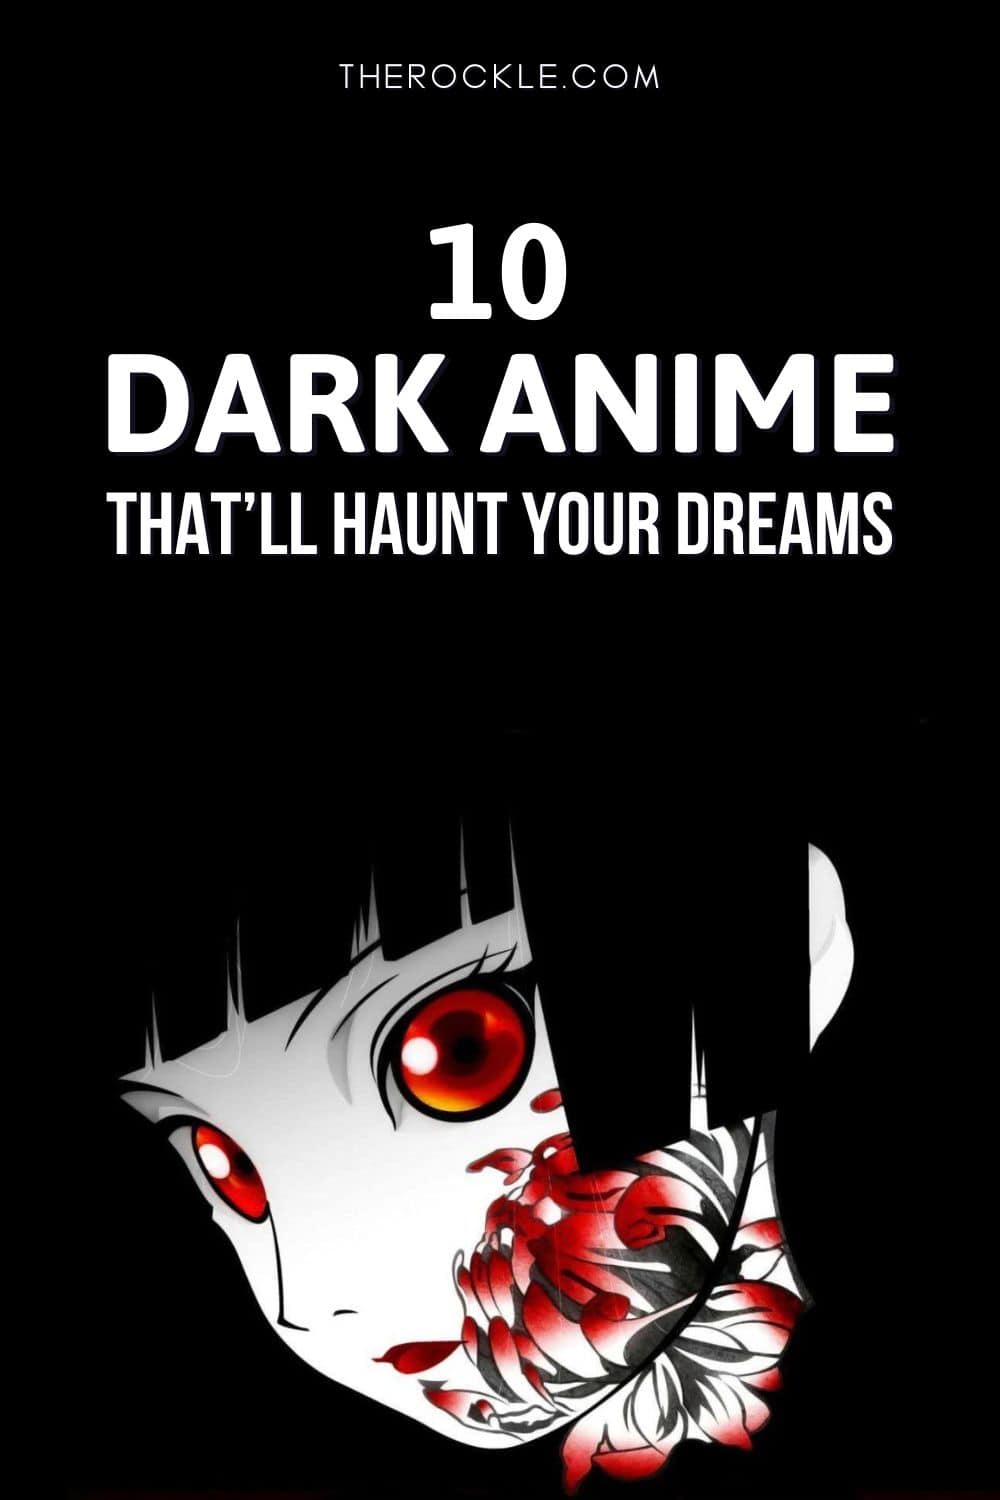 Waking Nightmares: The Ultimate Guide to The Darkest Animes Ever